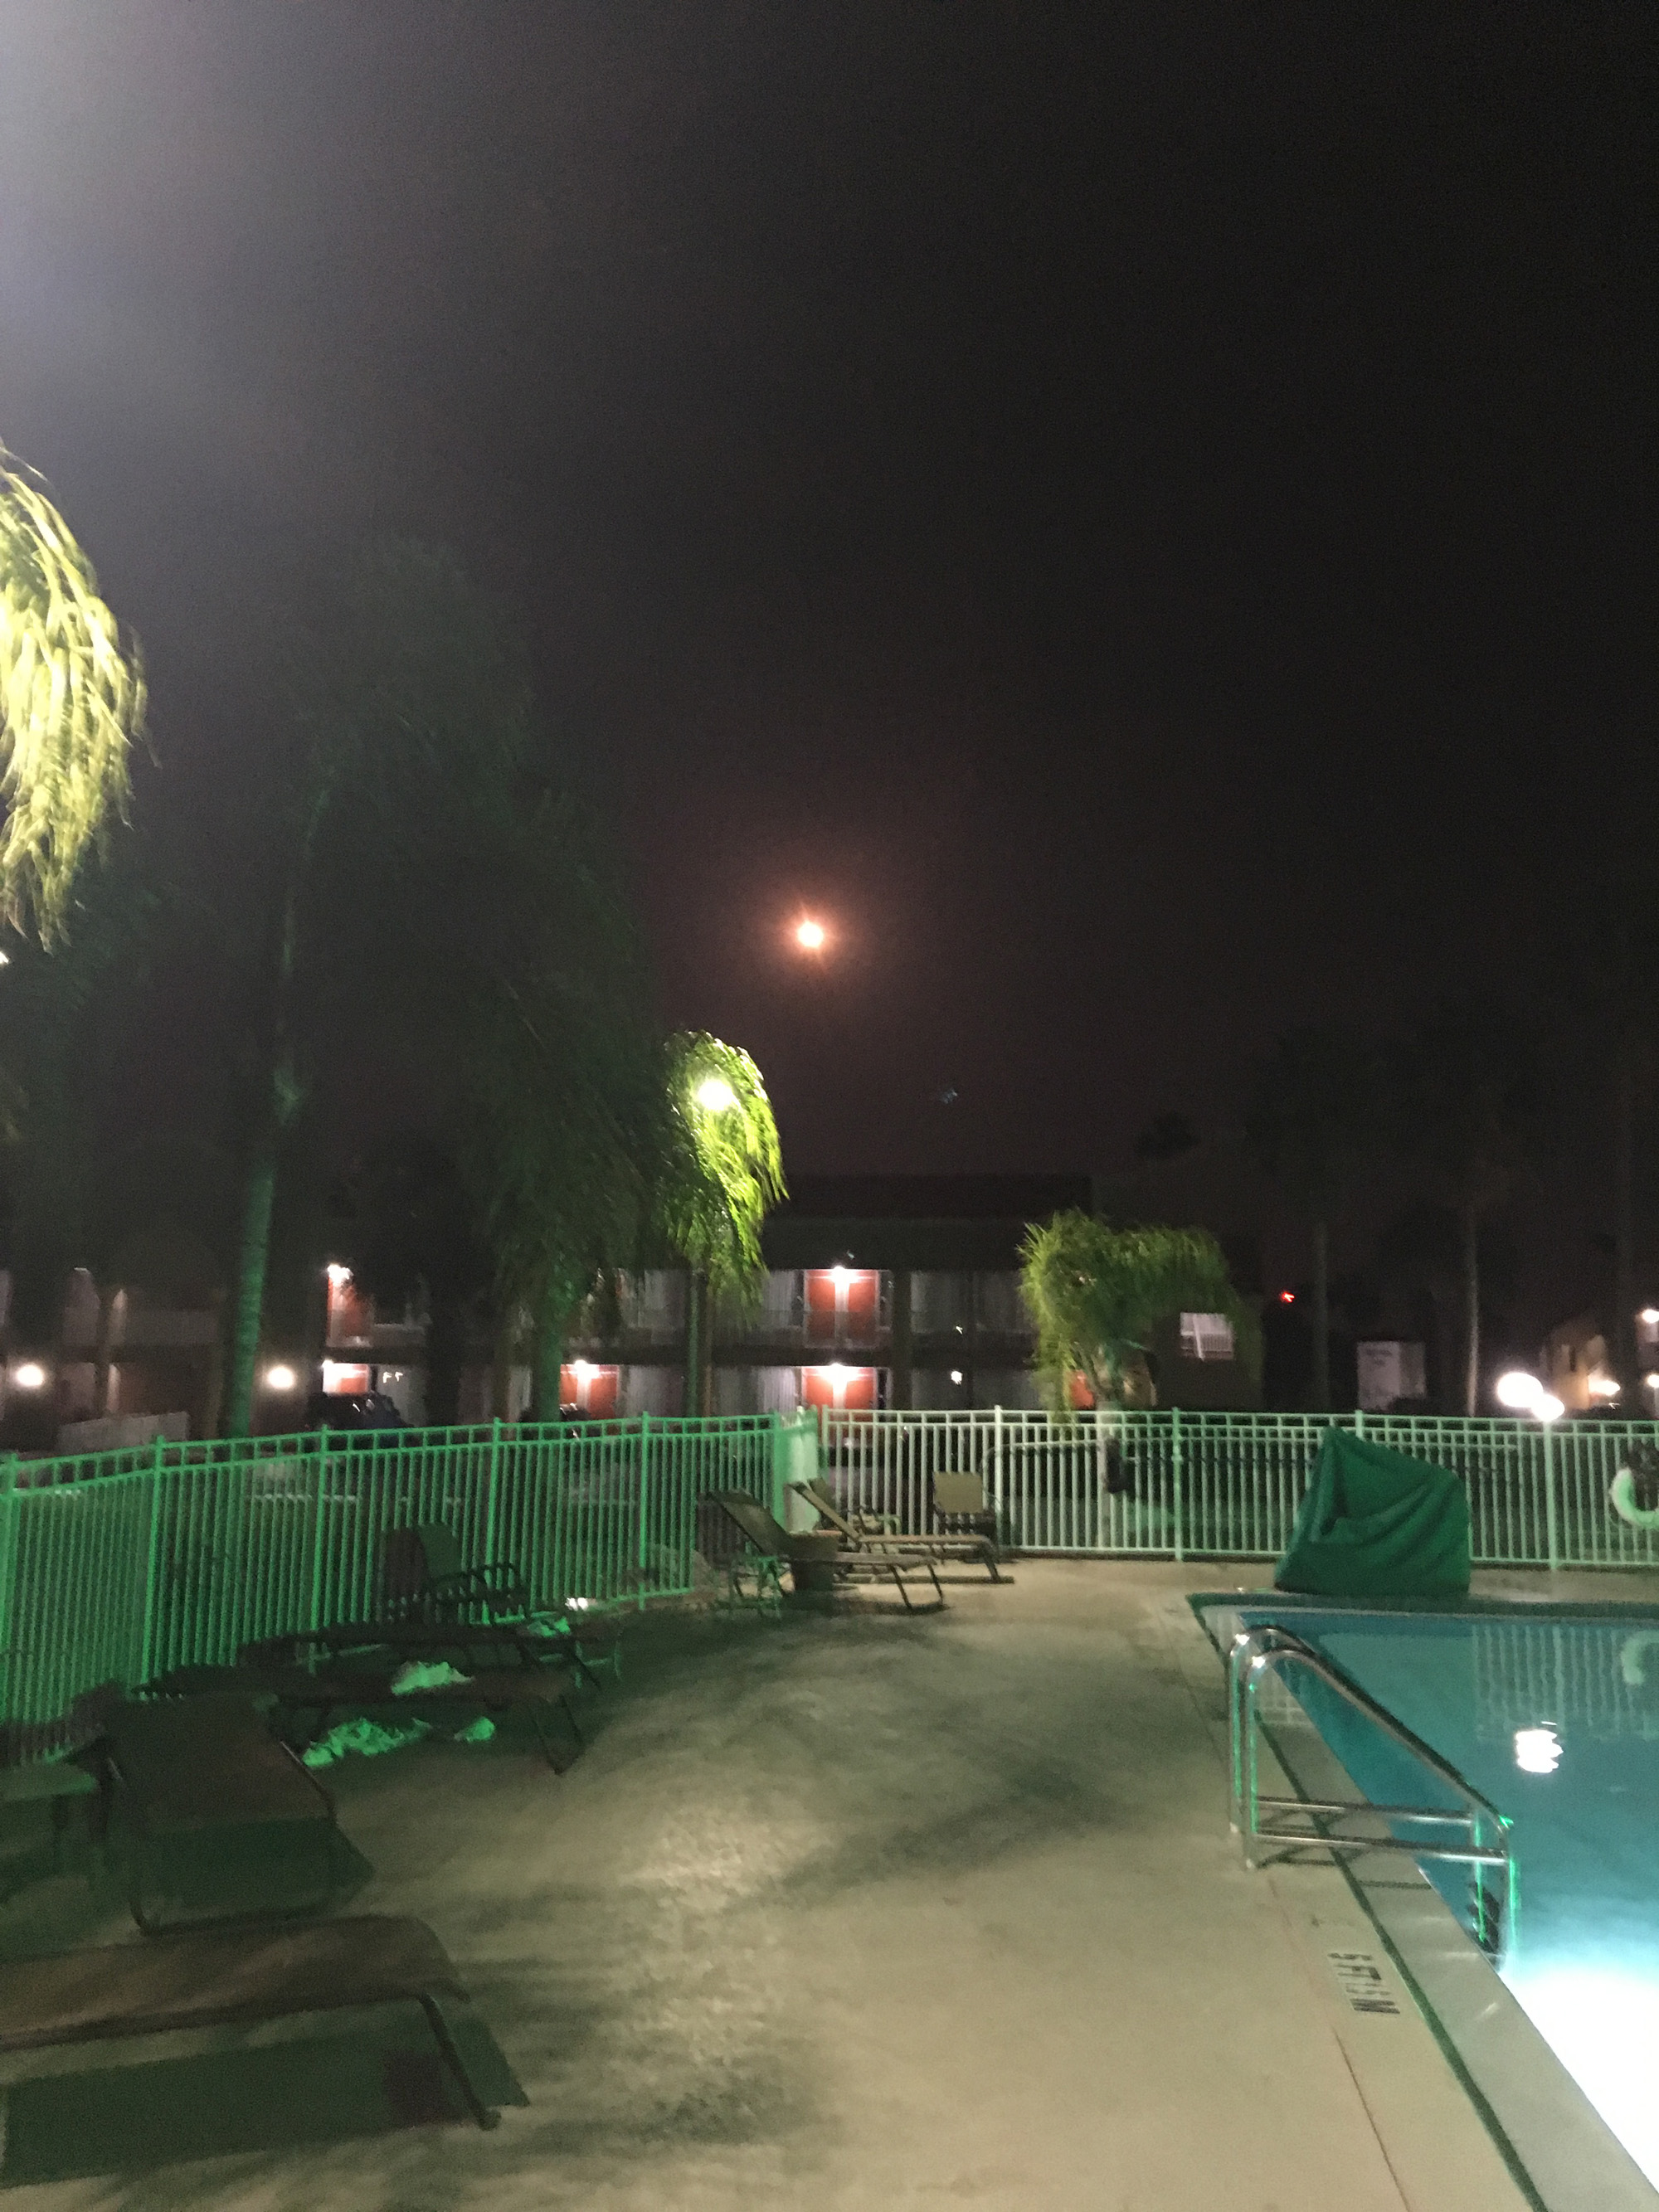 Atlas V rocket and GOES-R nighttime launch soars over the swimming pool at the Quality Inn Kennedy Space Center in Titusville, Florida  on Nov. 19, 2016. Credit: Wesley Baskin